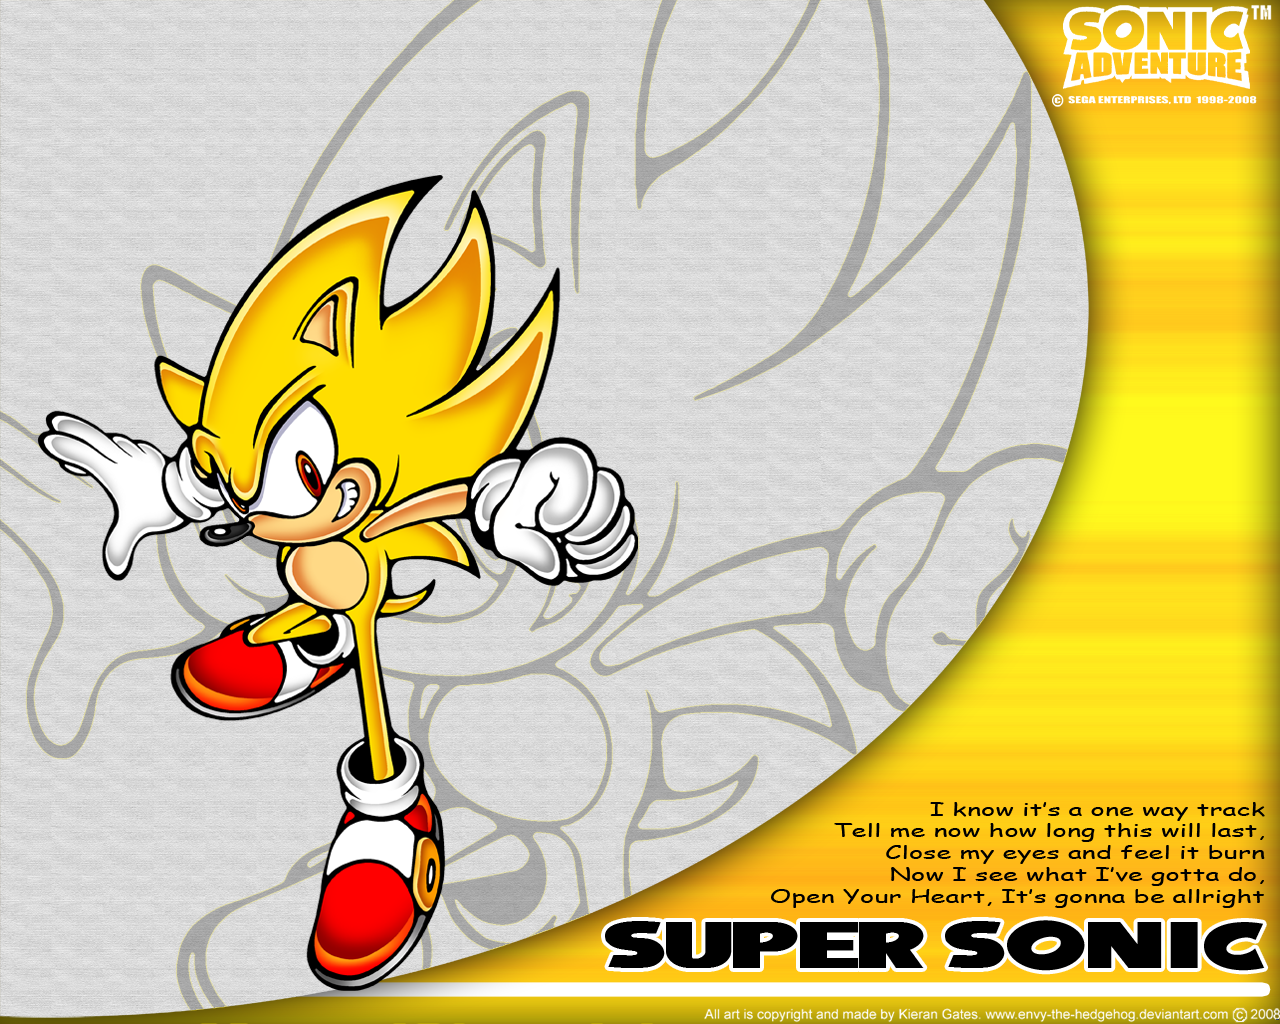 Sonic Adventure DX Wallpapers ~ G/C Entertainment System